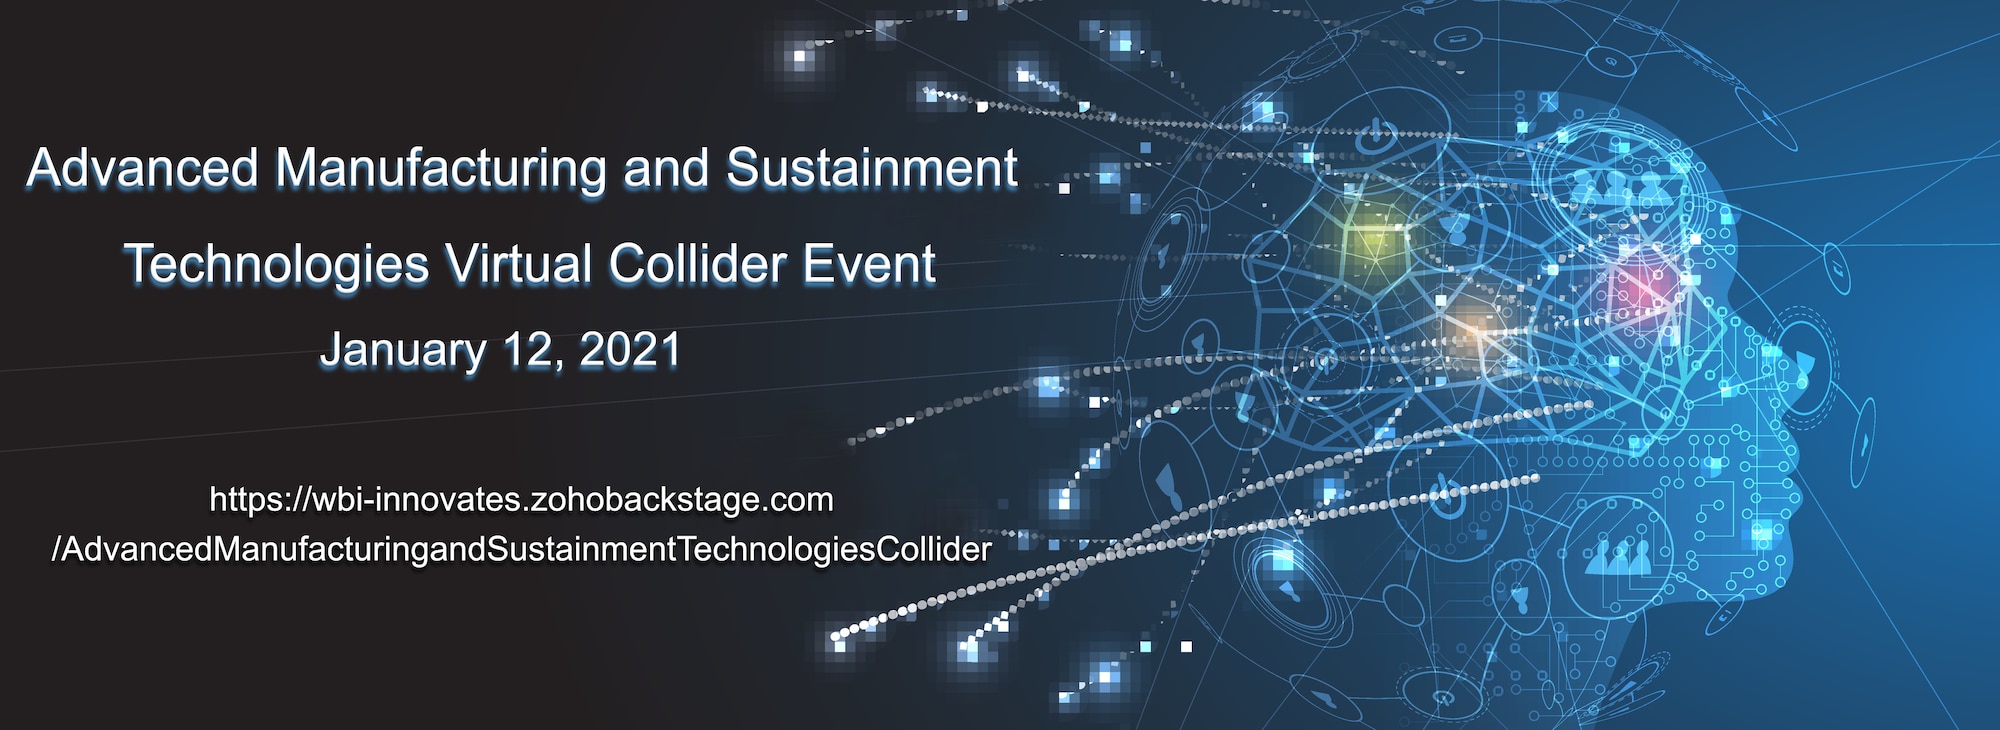 Advanced Manufacturing and Sustainment Technologies Virtual Collider Event, January 12, 2021. (Courtesy illustration)